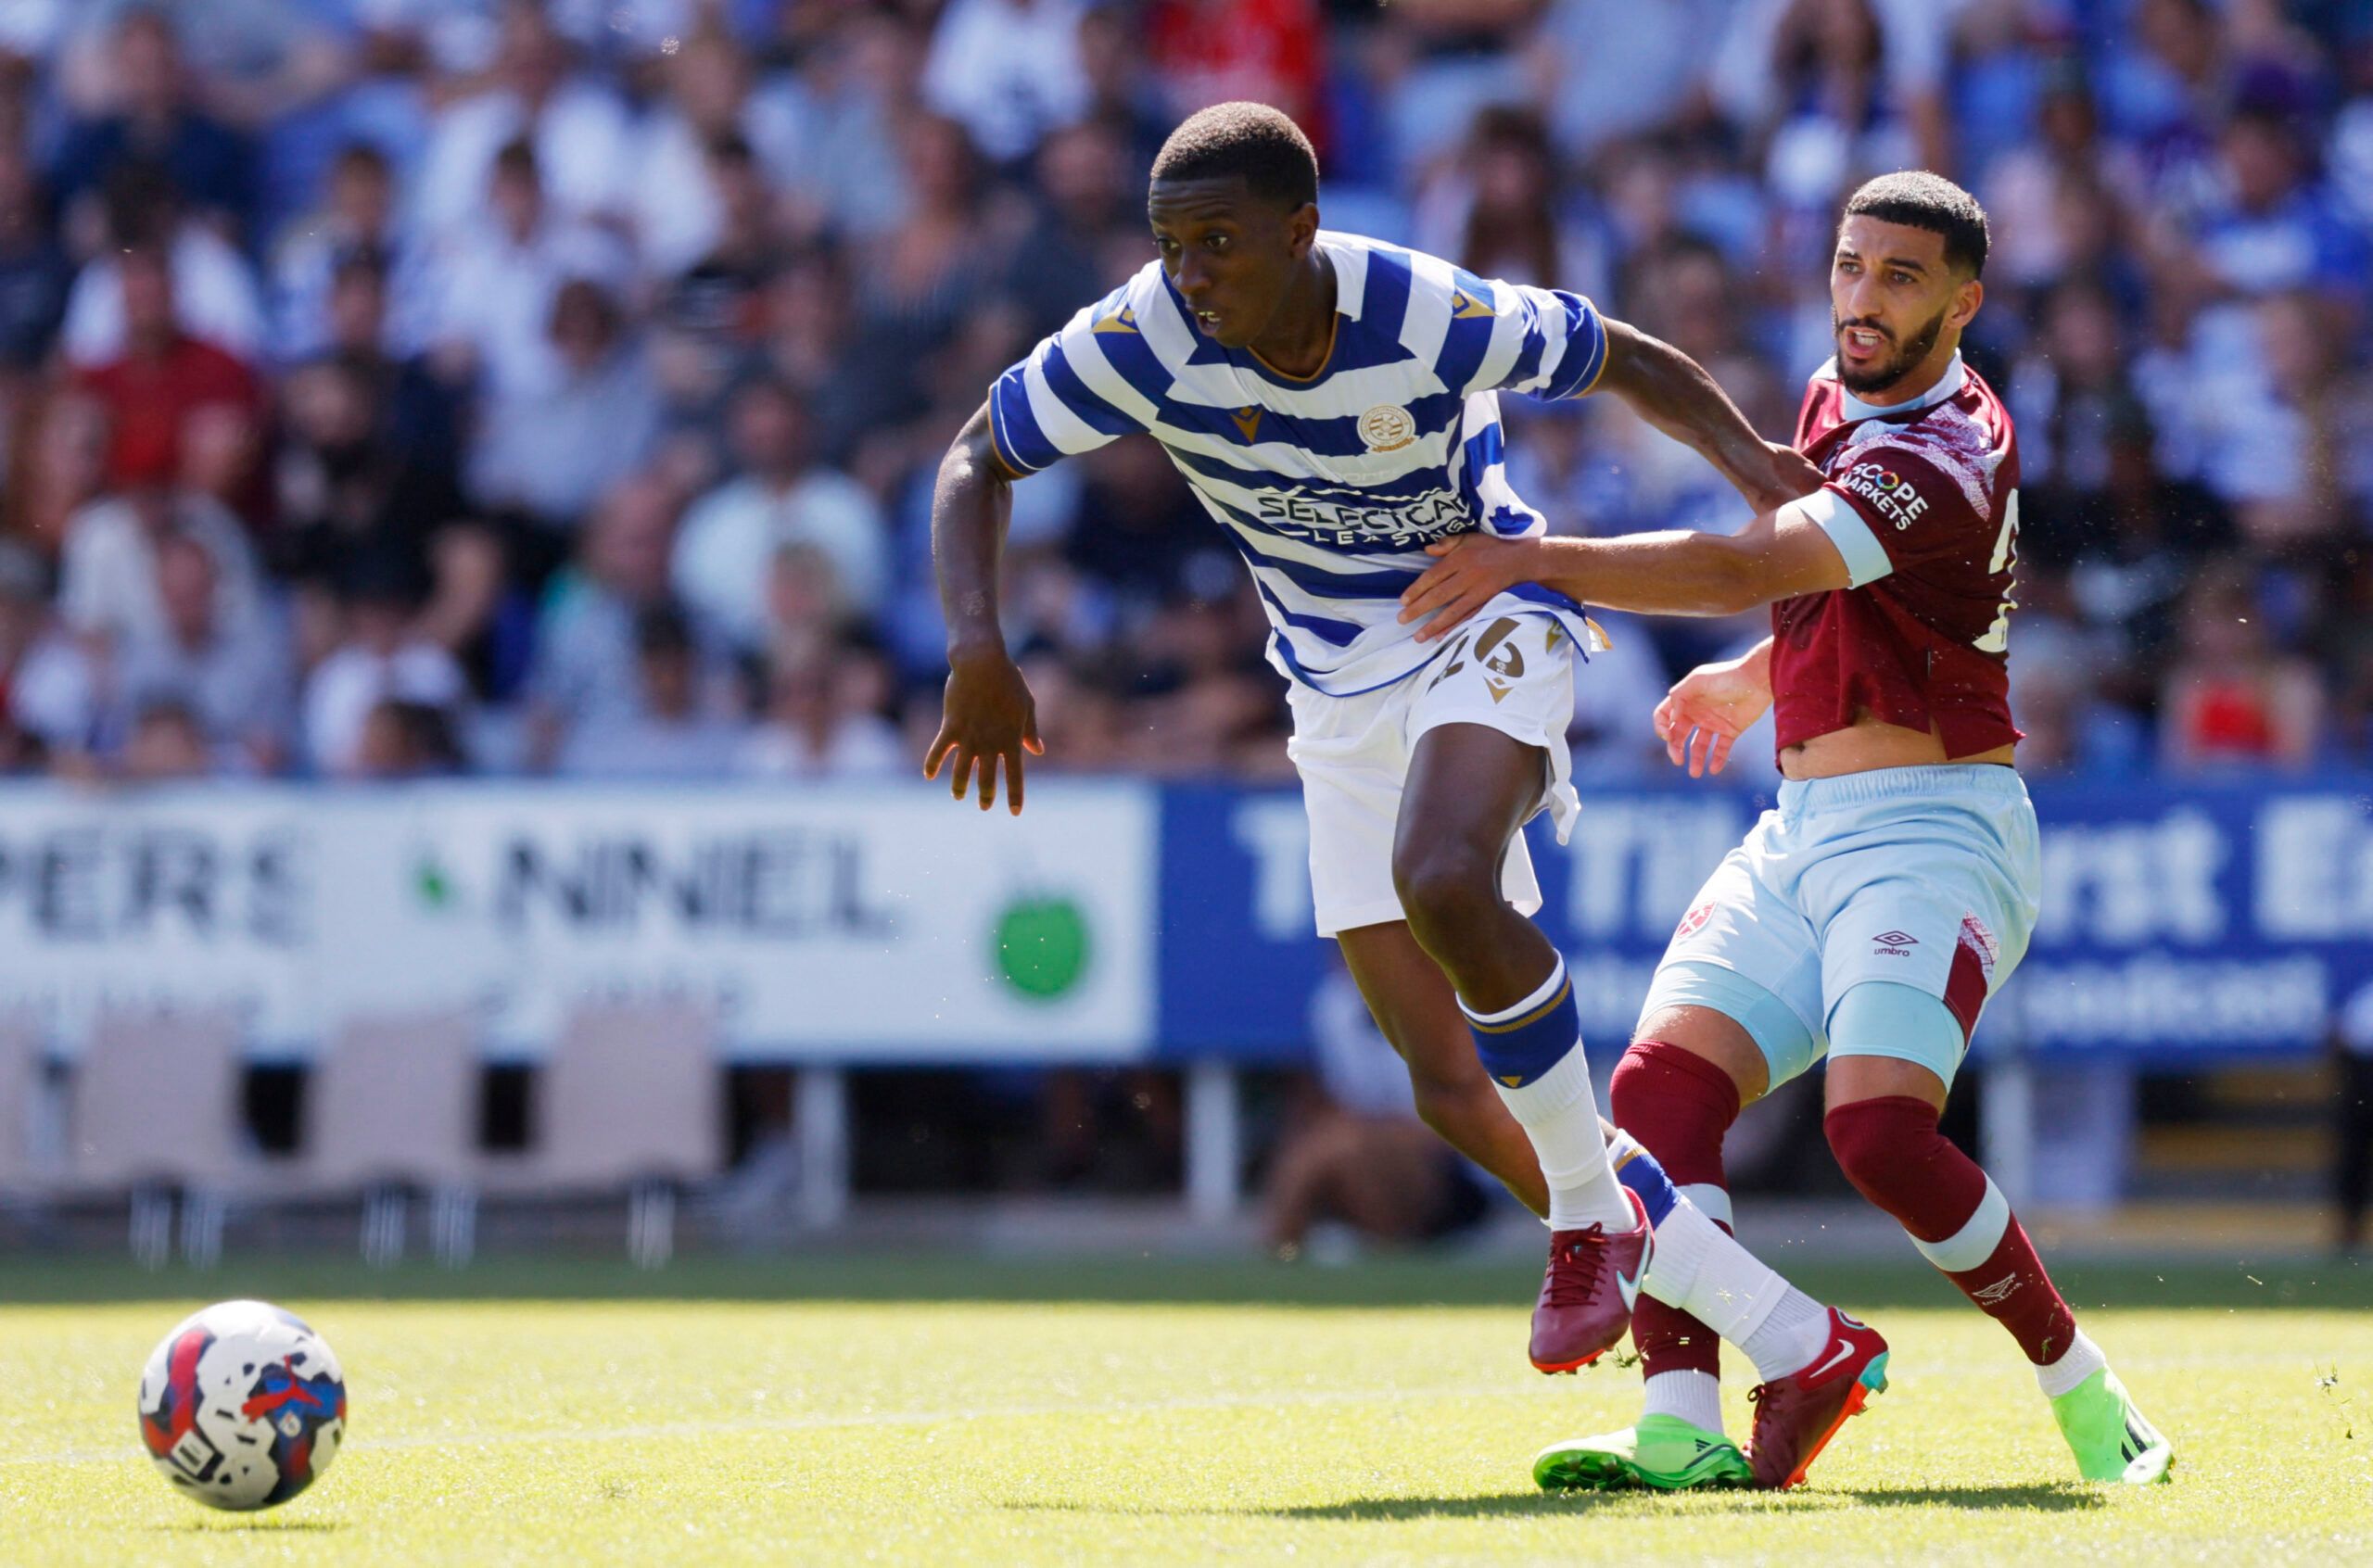 Soccer Football - Pre Season Friendly - Reading v West Ham United - Madejski Stadium, Reading, Britain - July 16, 2022 West Ham United's Mohamed Said Benrahma in action with Reading's Tyrese Fornah Action Images via Reuters/Andrew Couldridge